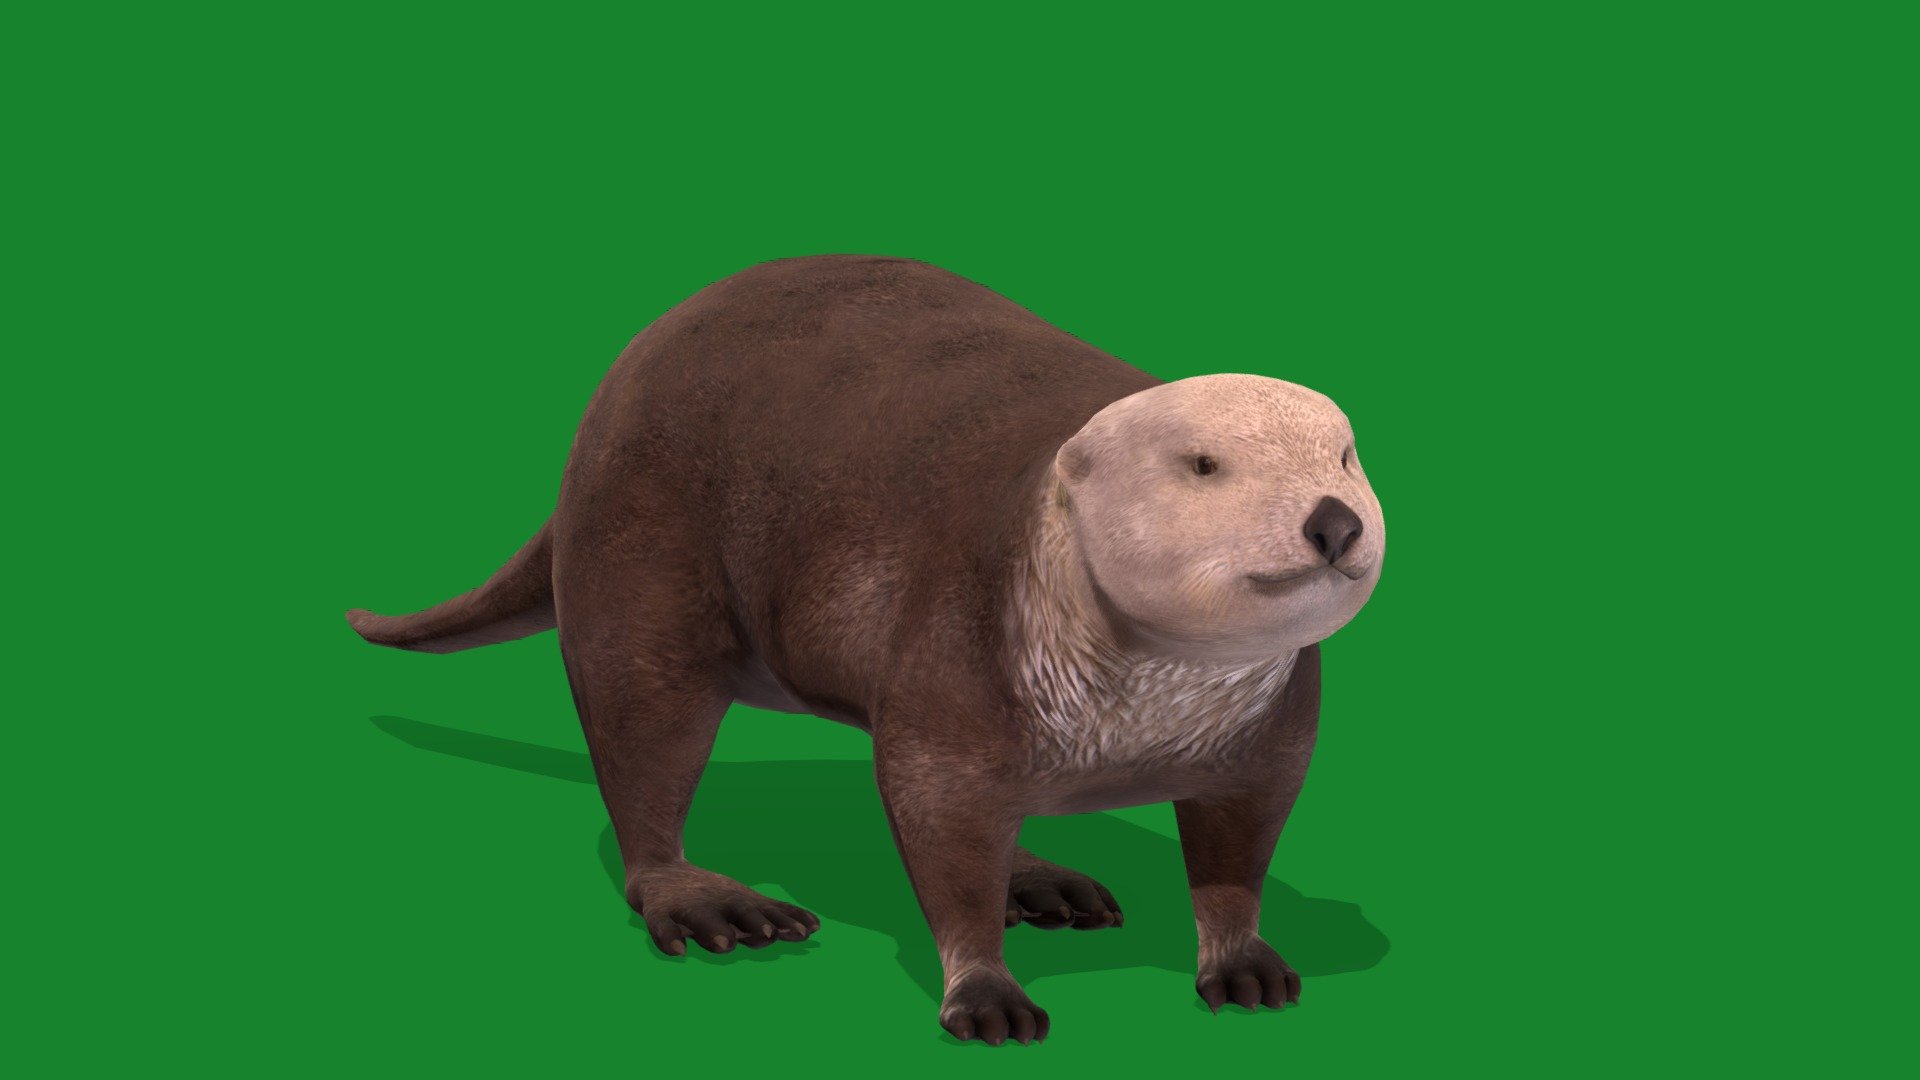 Sea Otter  (Weasel Family)Endangered,North Pacific Ocean

Enhydra lutris Animal Marine mammal (keystone species)Pet,Cute,Spring Animals

1 Draw Calls

LowPoly

Game Ready (Character)

Subdivision Surface Ready

9 - Animations 

4K PBR Textures 1 Material

Unreal/Unity FBX 

Blend File 3.6.5 LTS / 4 Plus

USDZ File (AR Ready). Real Scale Dimension (Xcode ,Reality Composer, Keynote Ready)

Textures Files

GLB File (Unreal 5.1 Plus Native Support,Godot)

Gltf File ( Spark AR, Lens Studio(SnapChat) , Effector(Tiktok) , Spline, Play Canvas,Omiverse ) Compatible

Triangles -11745

Faces -7242

Edges -13218

Vertices -6003

Diffuse, Metallic, Roughness , Normal Map ,Specular Map,AO


Sea otters are marine mammals that live in kelp forests along the North American coast.They are the largest member of the weasel family and can grow to be nearly 5 feet long weigh almost 100 pounds.The sea otter,native to the coasts of the northern and eastern North Pacific Ocean 3d model